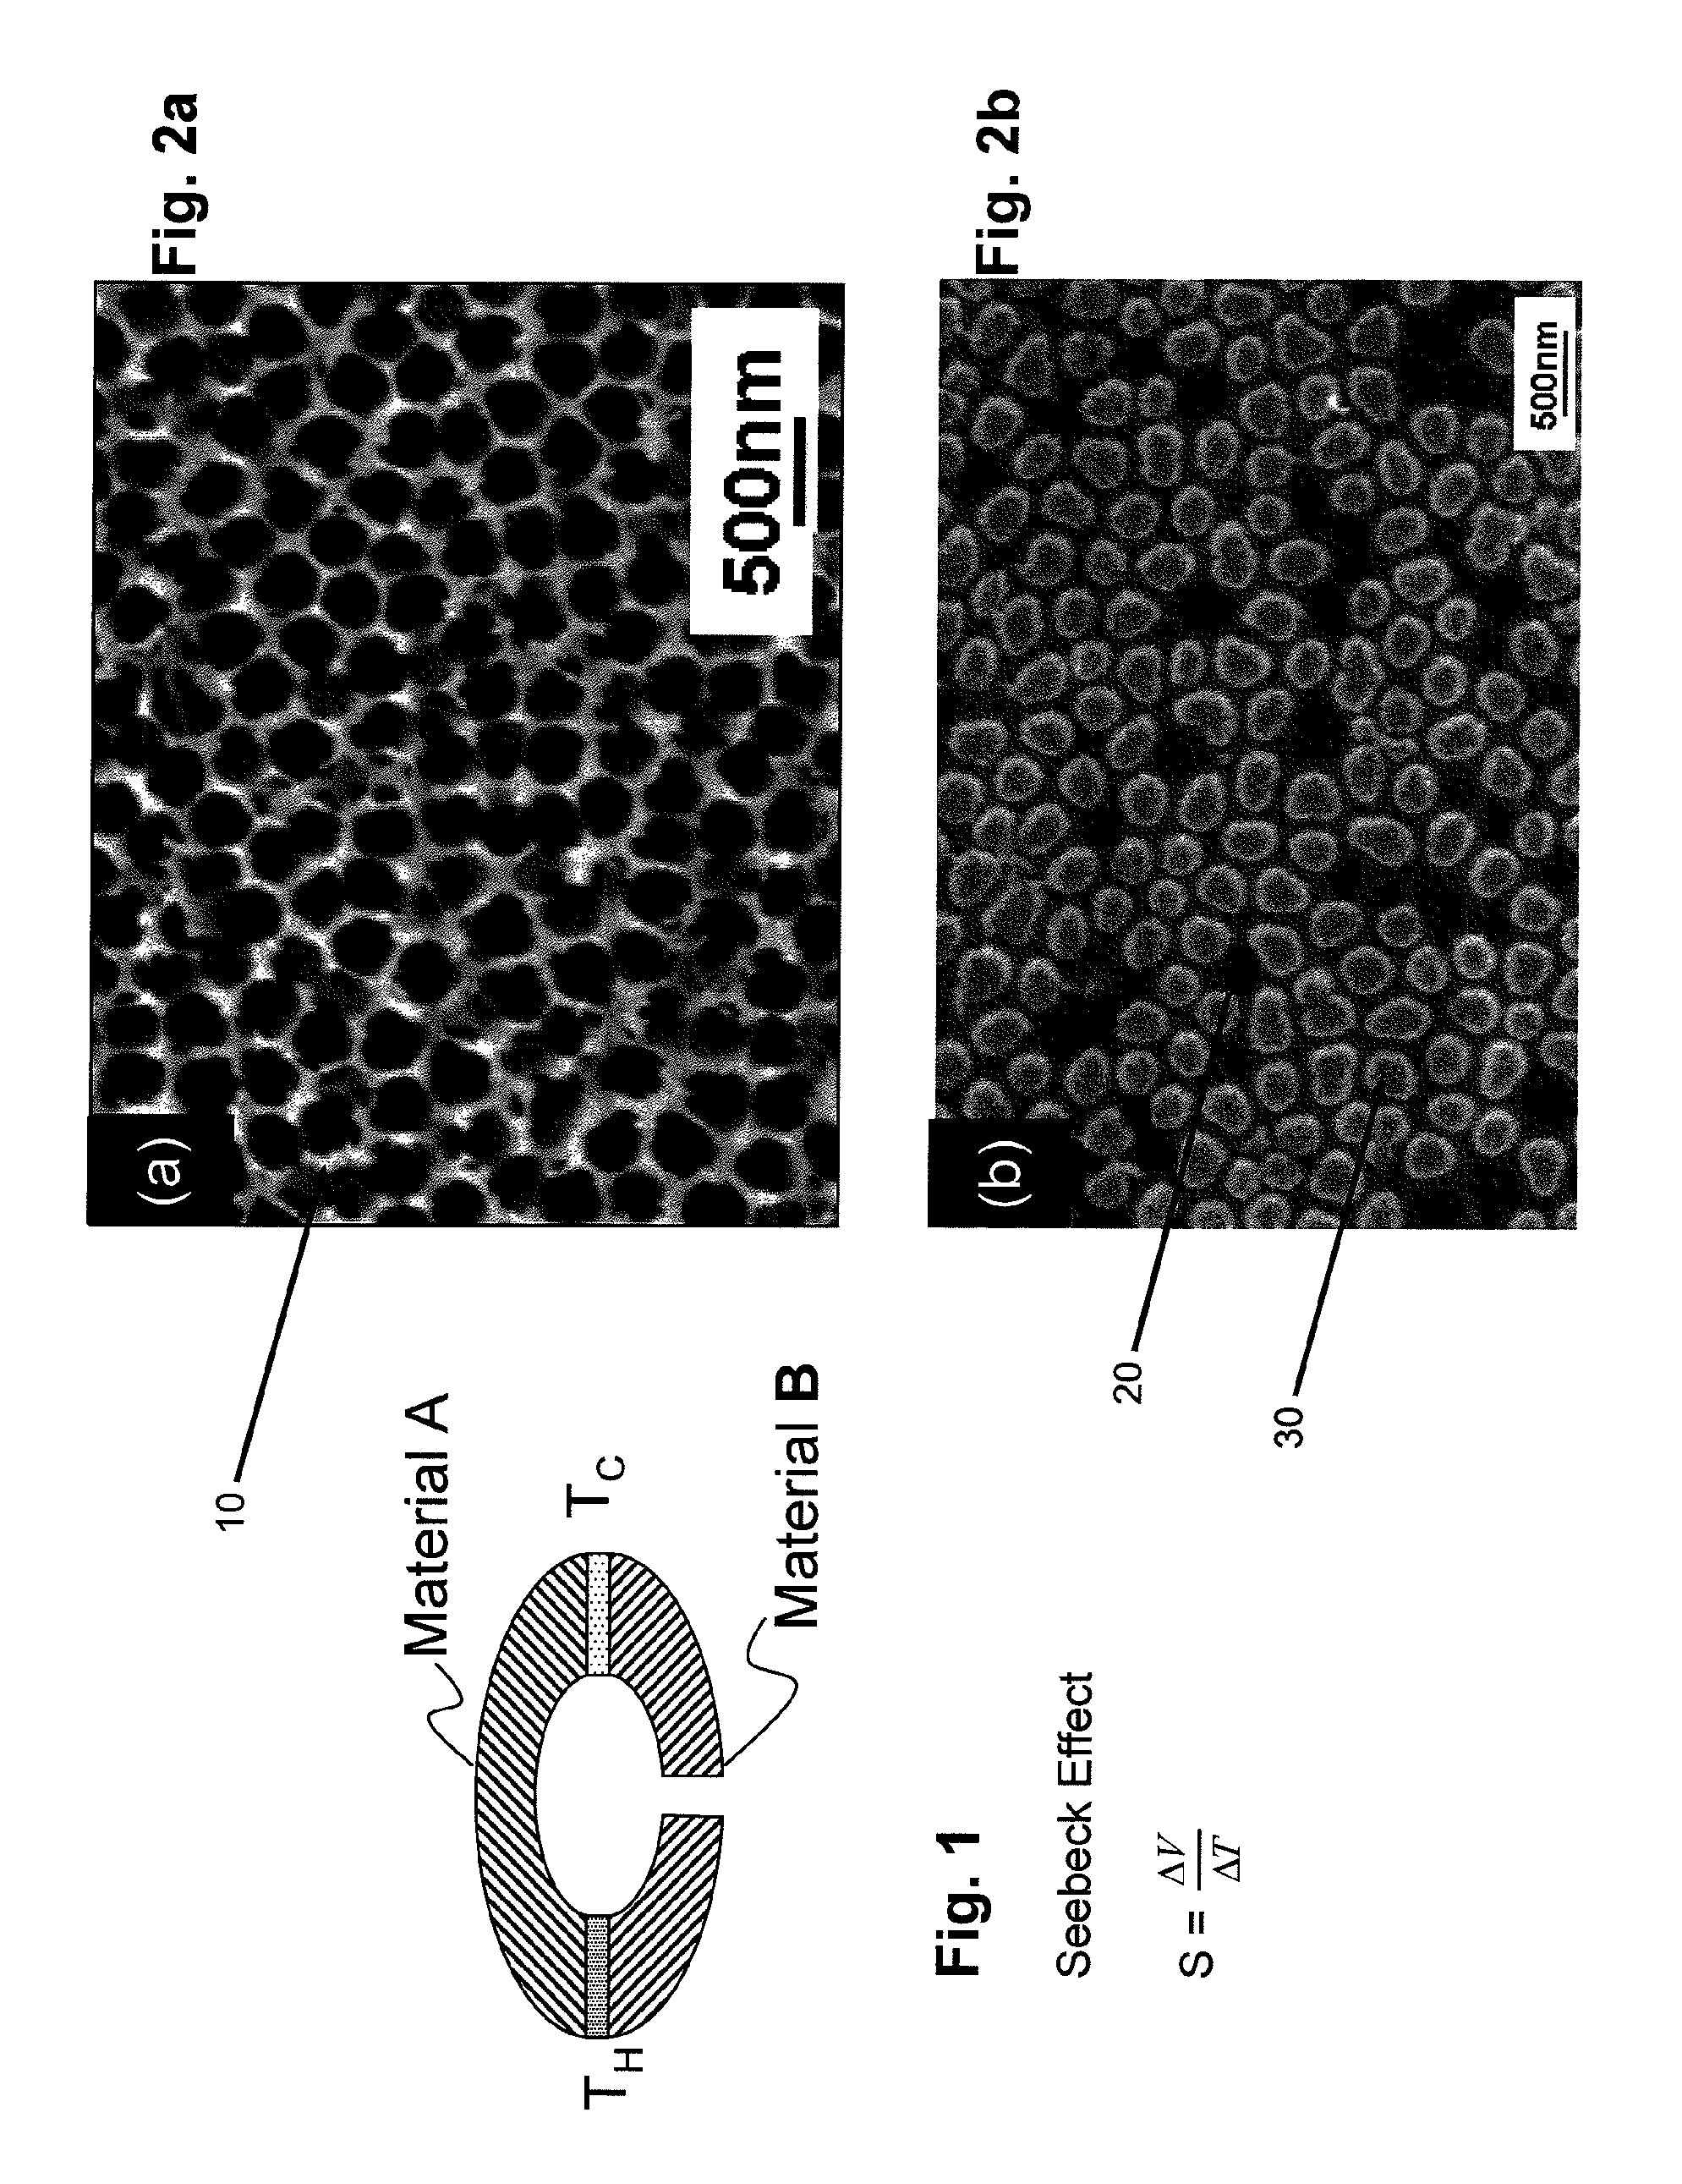 Fabrication of nanowire array composites for thermoelectric power generators and microcoolers